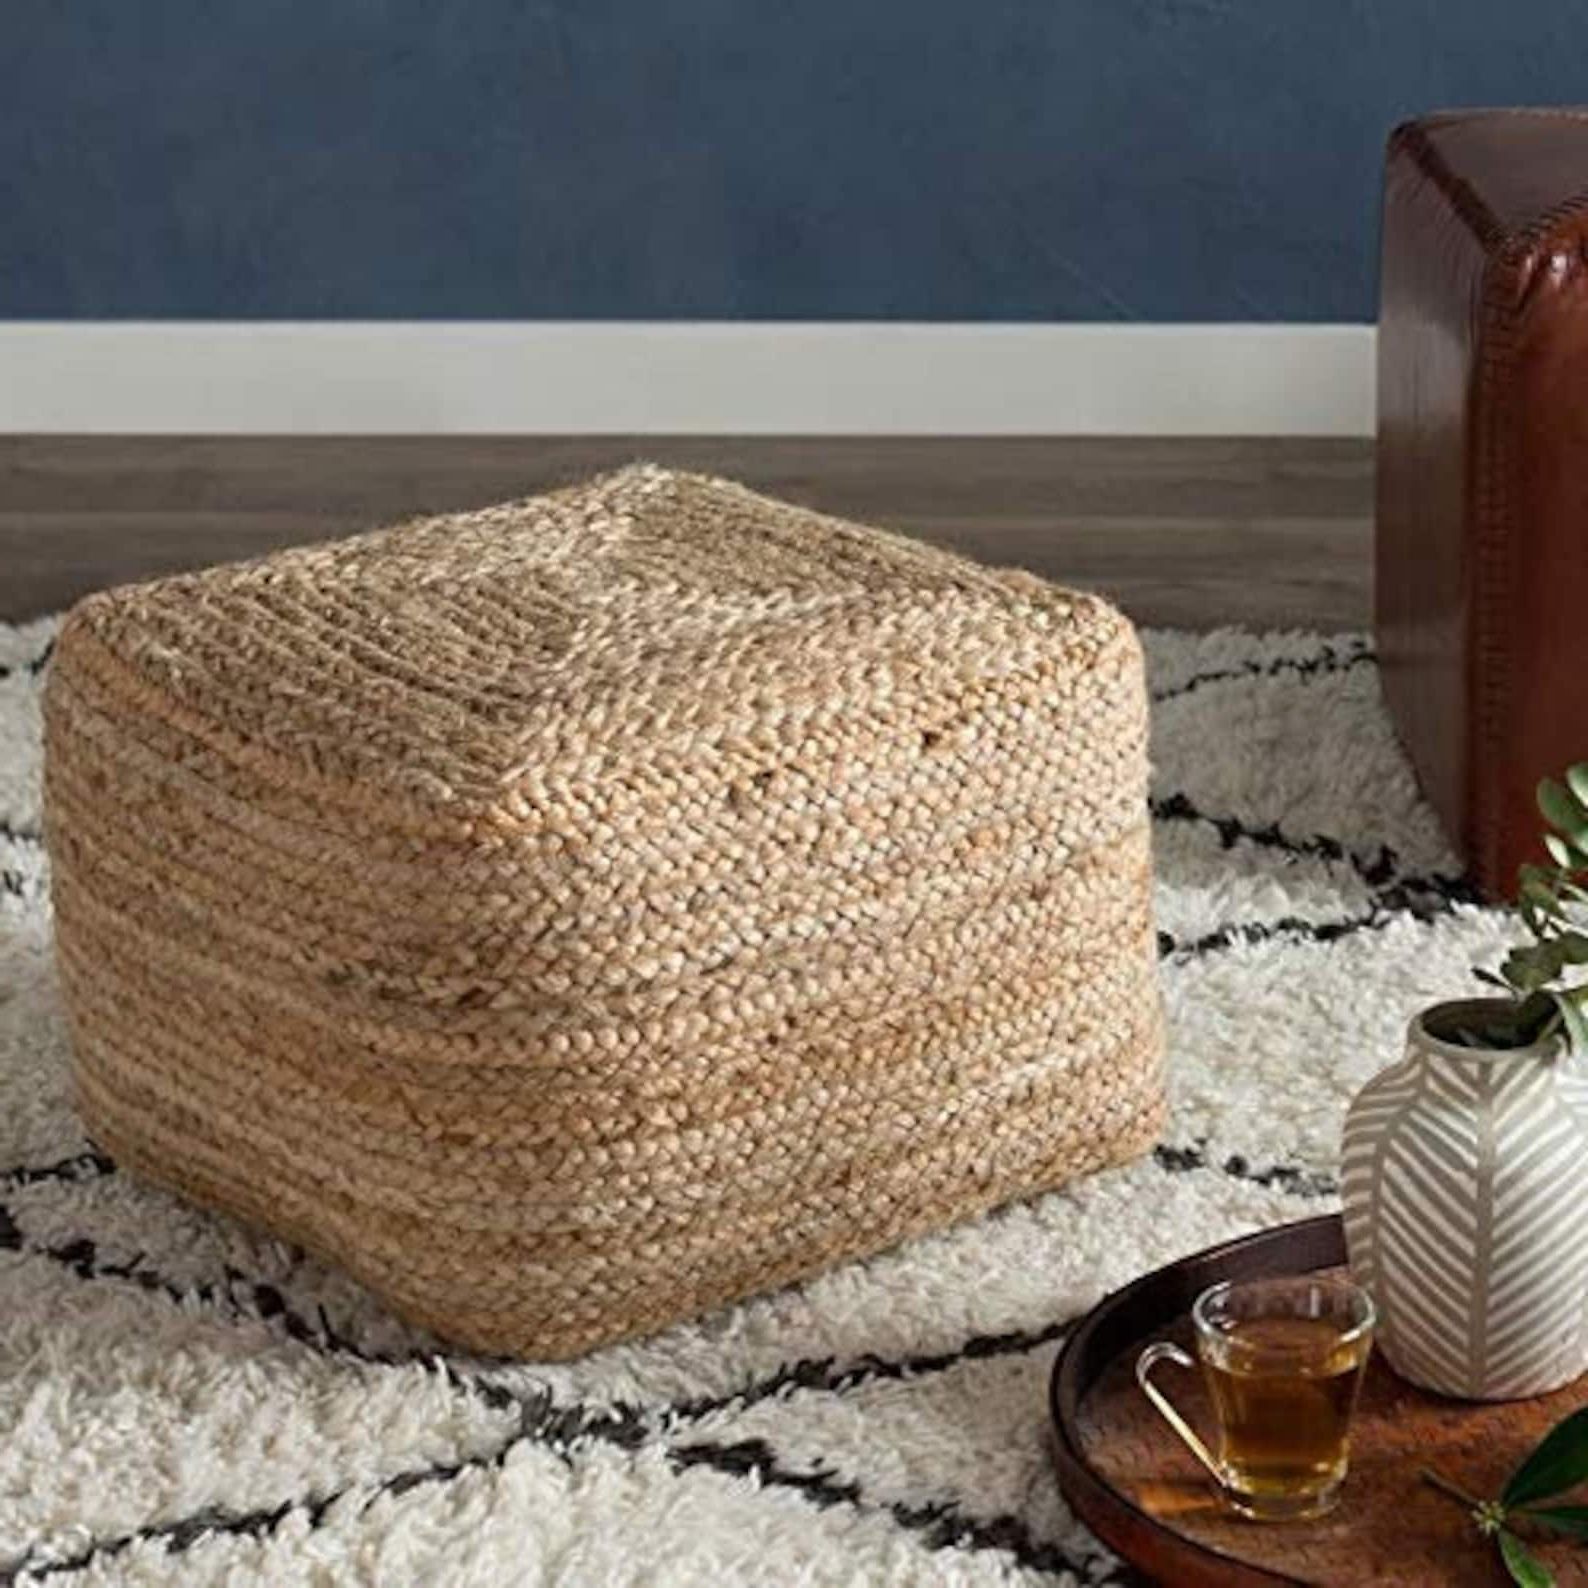 Most Recently Released Black Jute Pouf Ottomans Throughout Jute Pouf Ottoman Braided Jute Ottoman Pouf Decorative (View 4 of 10)